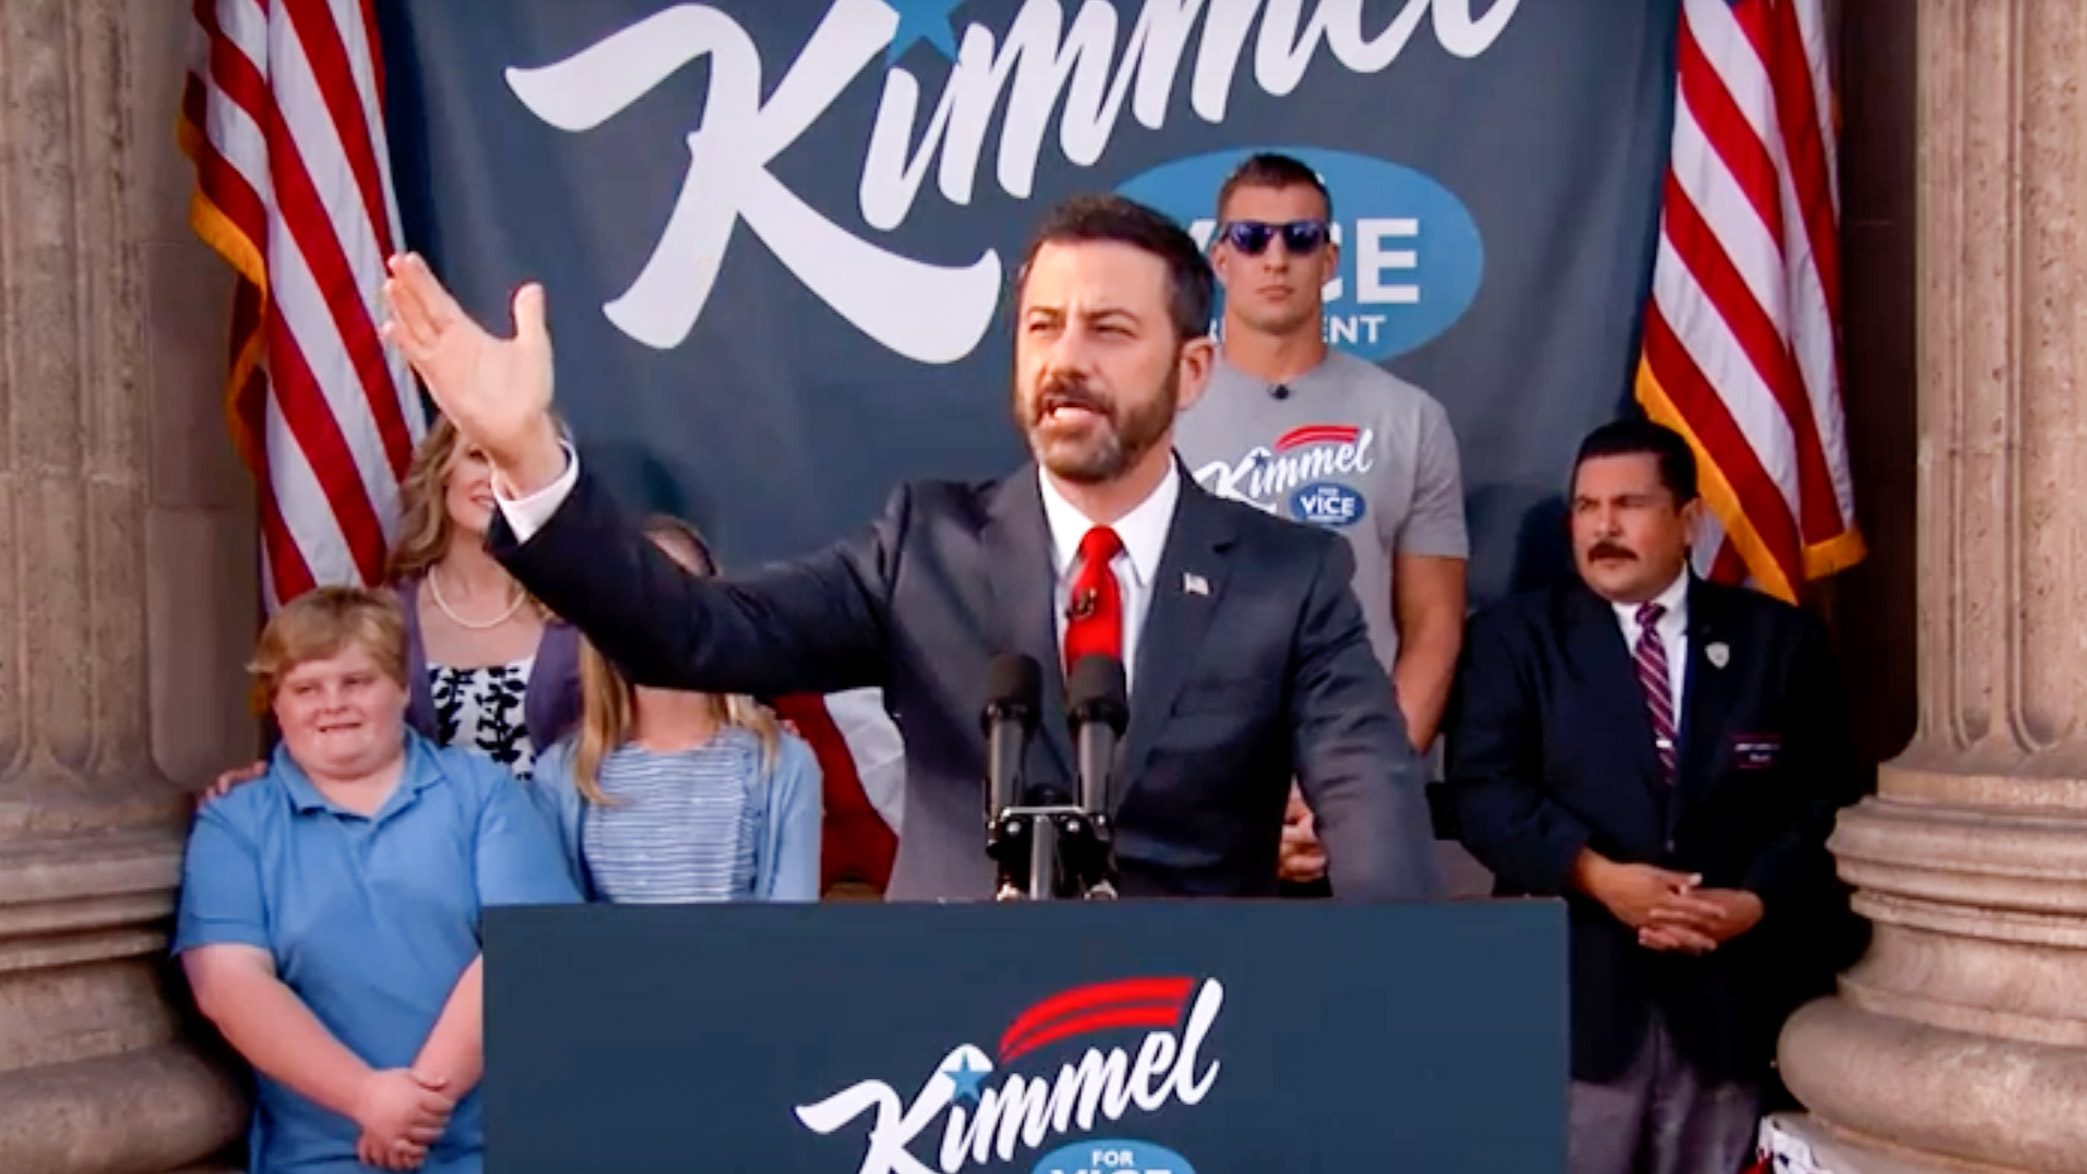 WATCH: Jimmy Kimmel ‘campaigns’ to be US Vice President